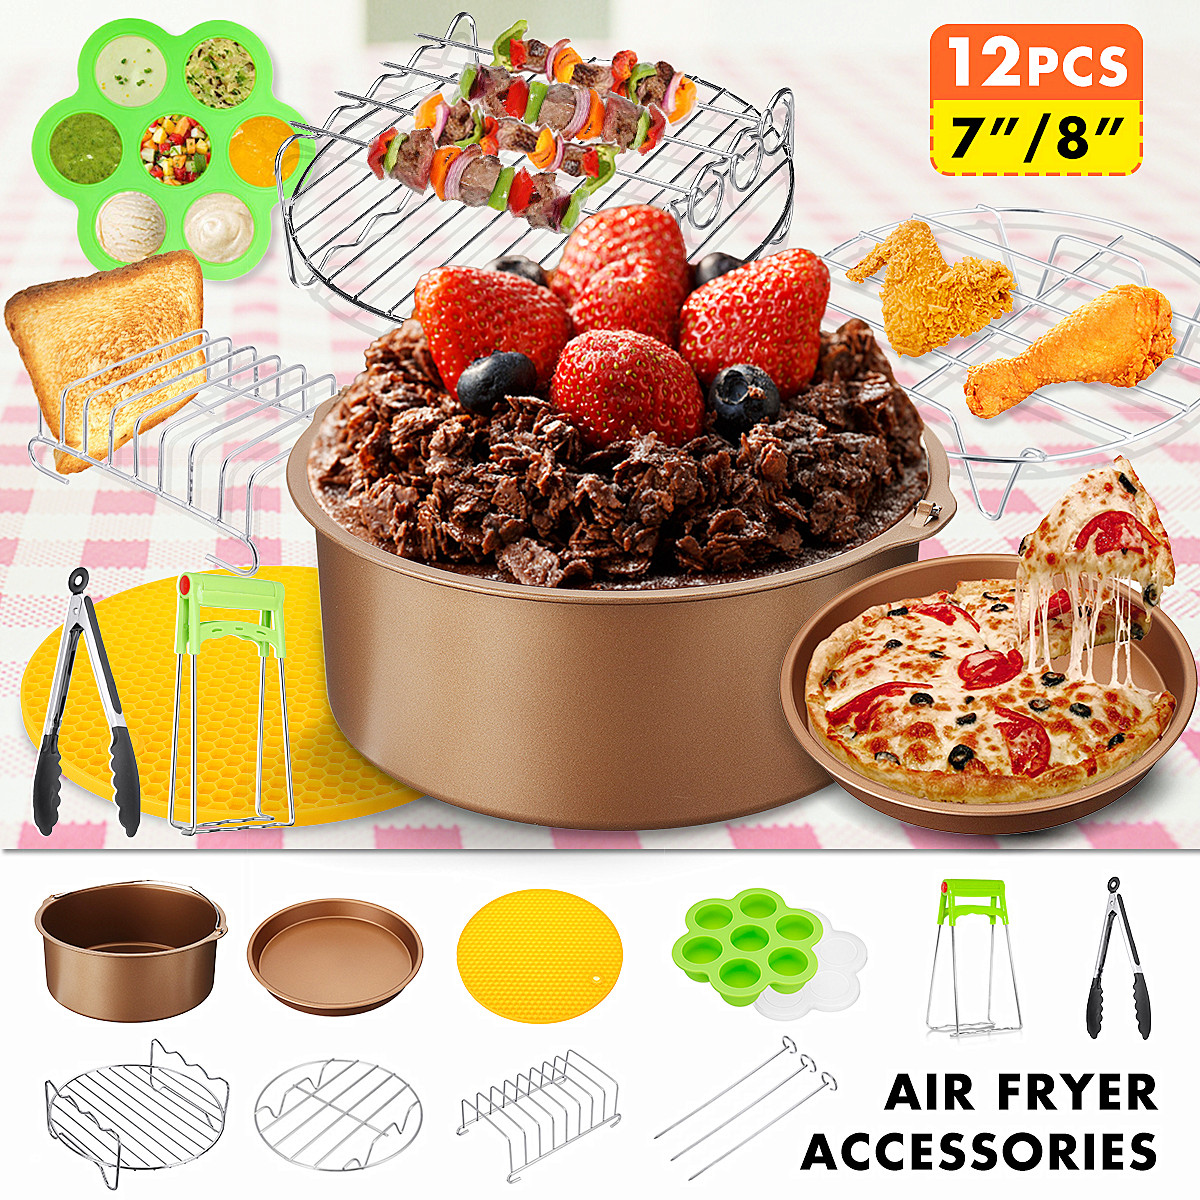 12Pcs-7quot8quot-Air-Fryer-Accessories-Kitchen-Cooking-Baking-Cake-Pizza-Barbecue-Pan-1634255-1